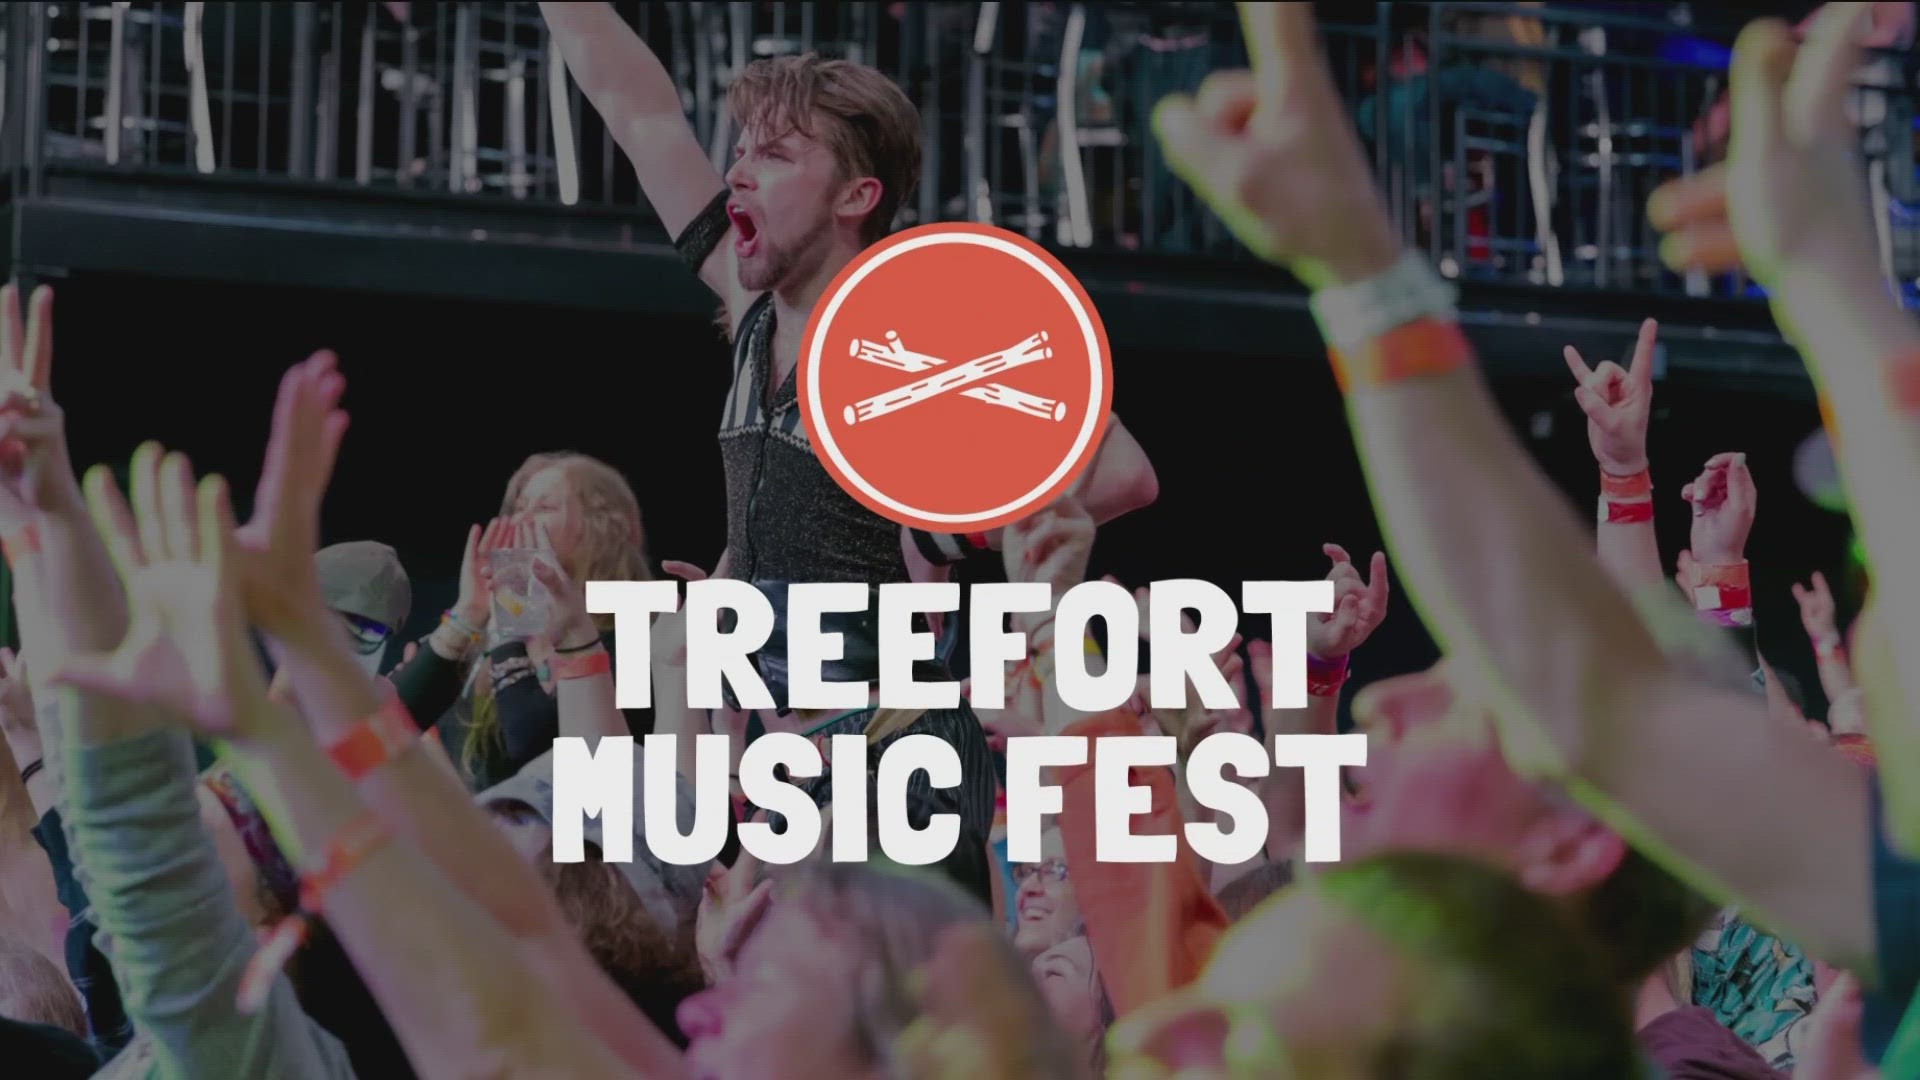 The 11th Treefort Music Fest begins Wednesday, March 22 in downtown Boise. Event organizers join KTVB to preview what to expect.